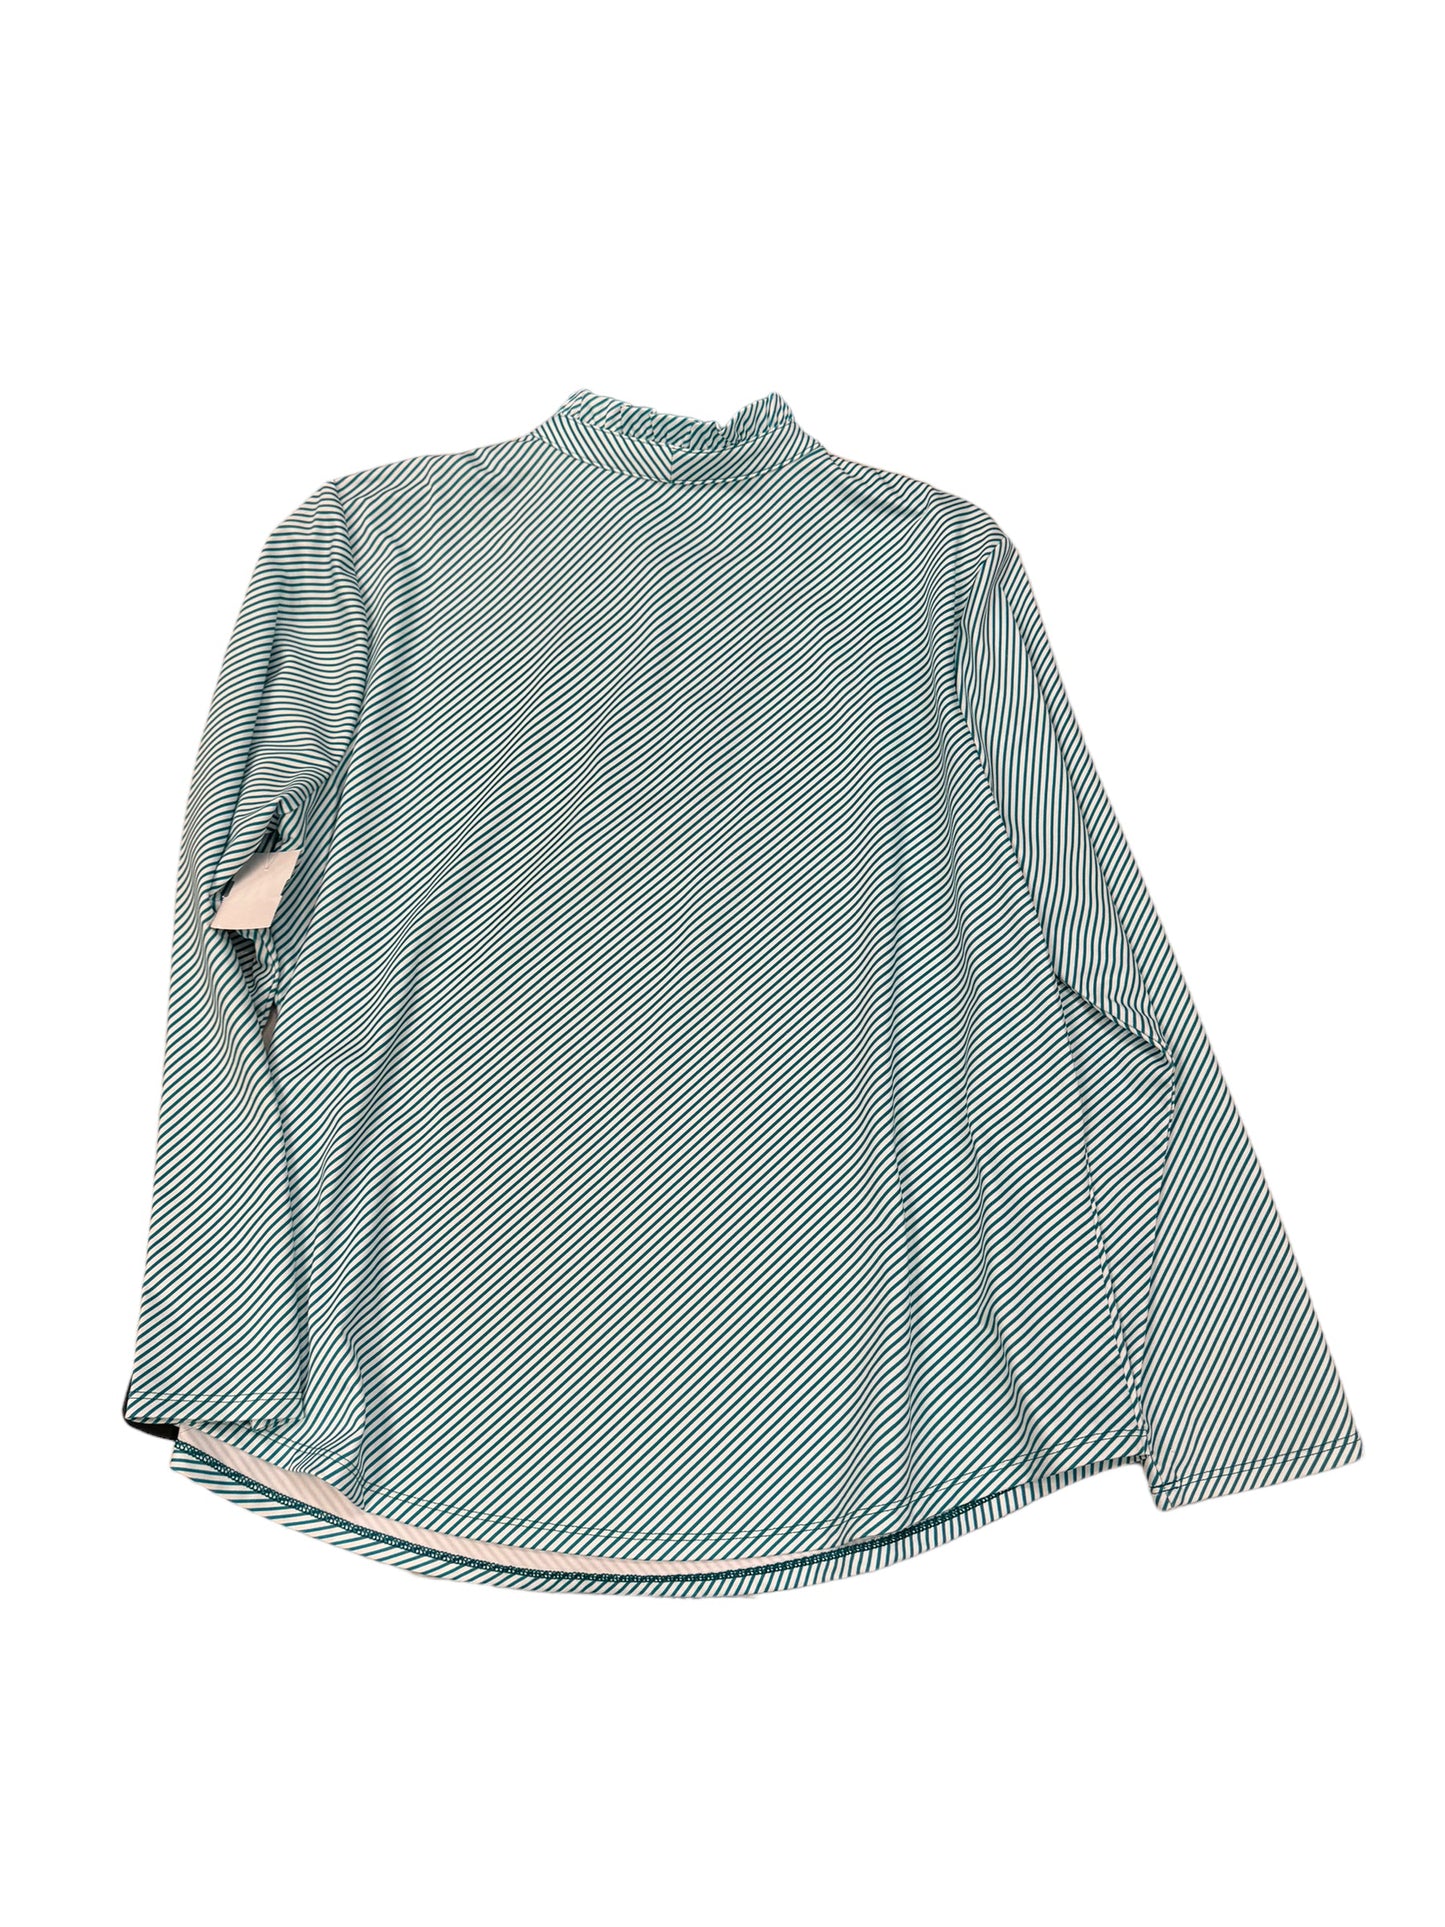 Athletic Top Long Sleeve Collar By Zenergy By Chicos  Size: L